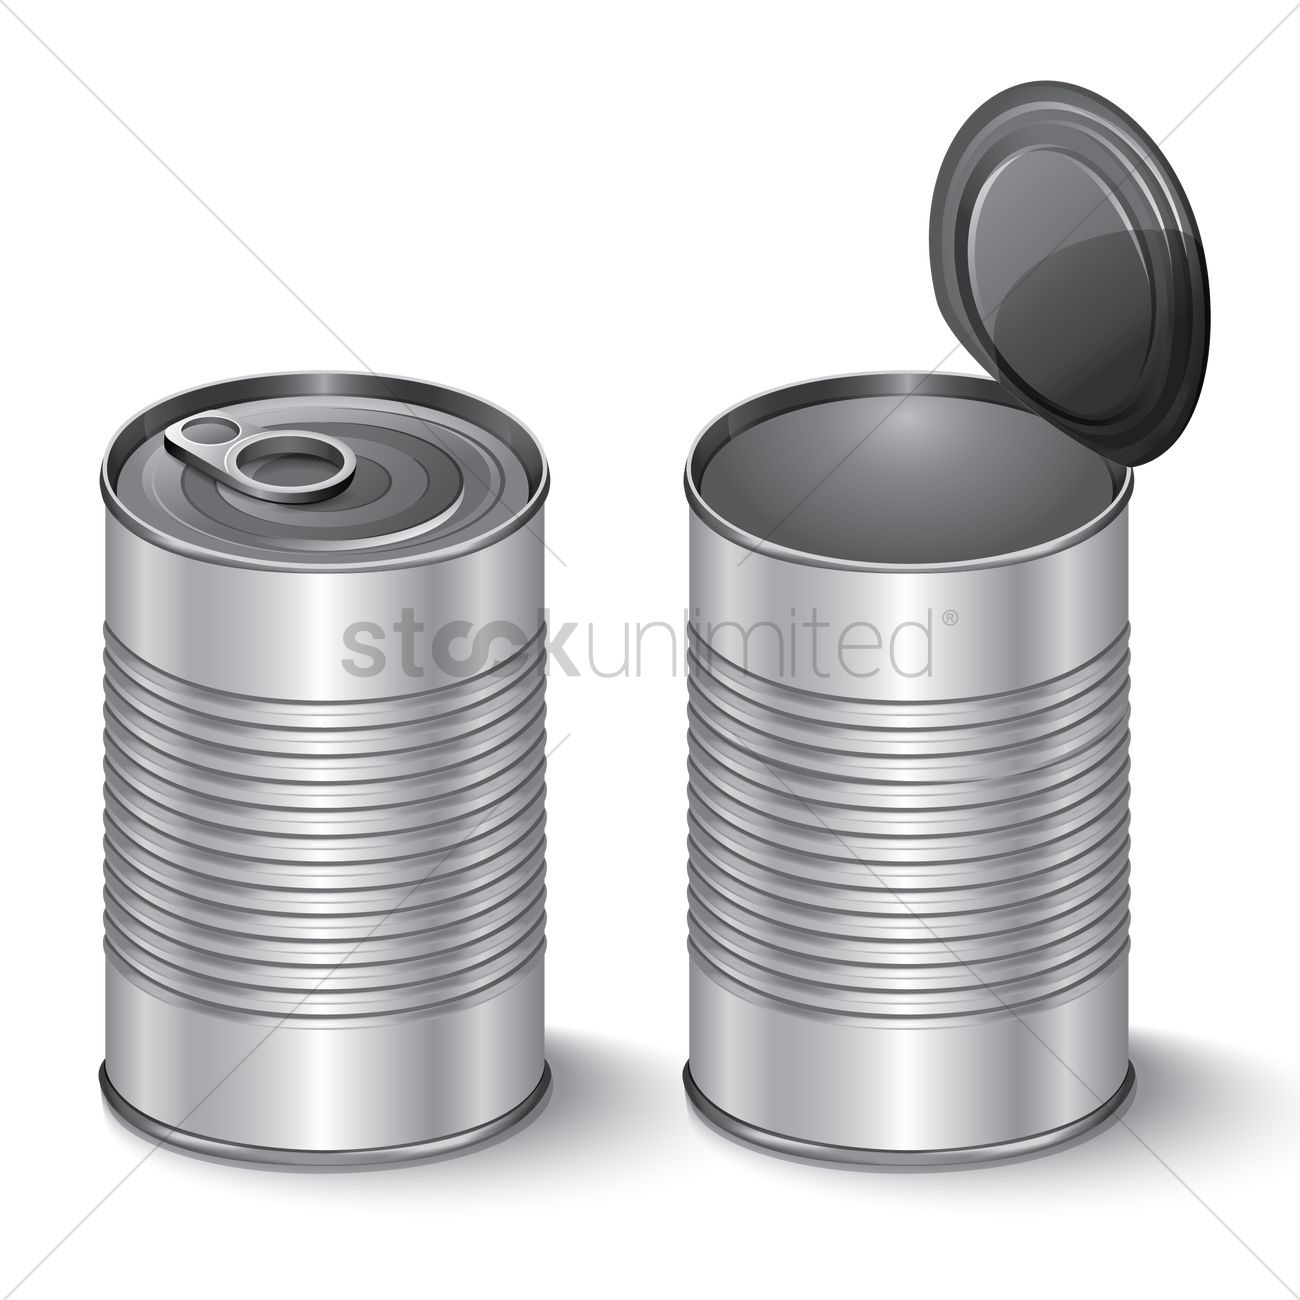 Tin can clipart 5 » Clipart Station.